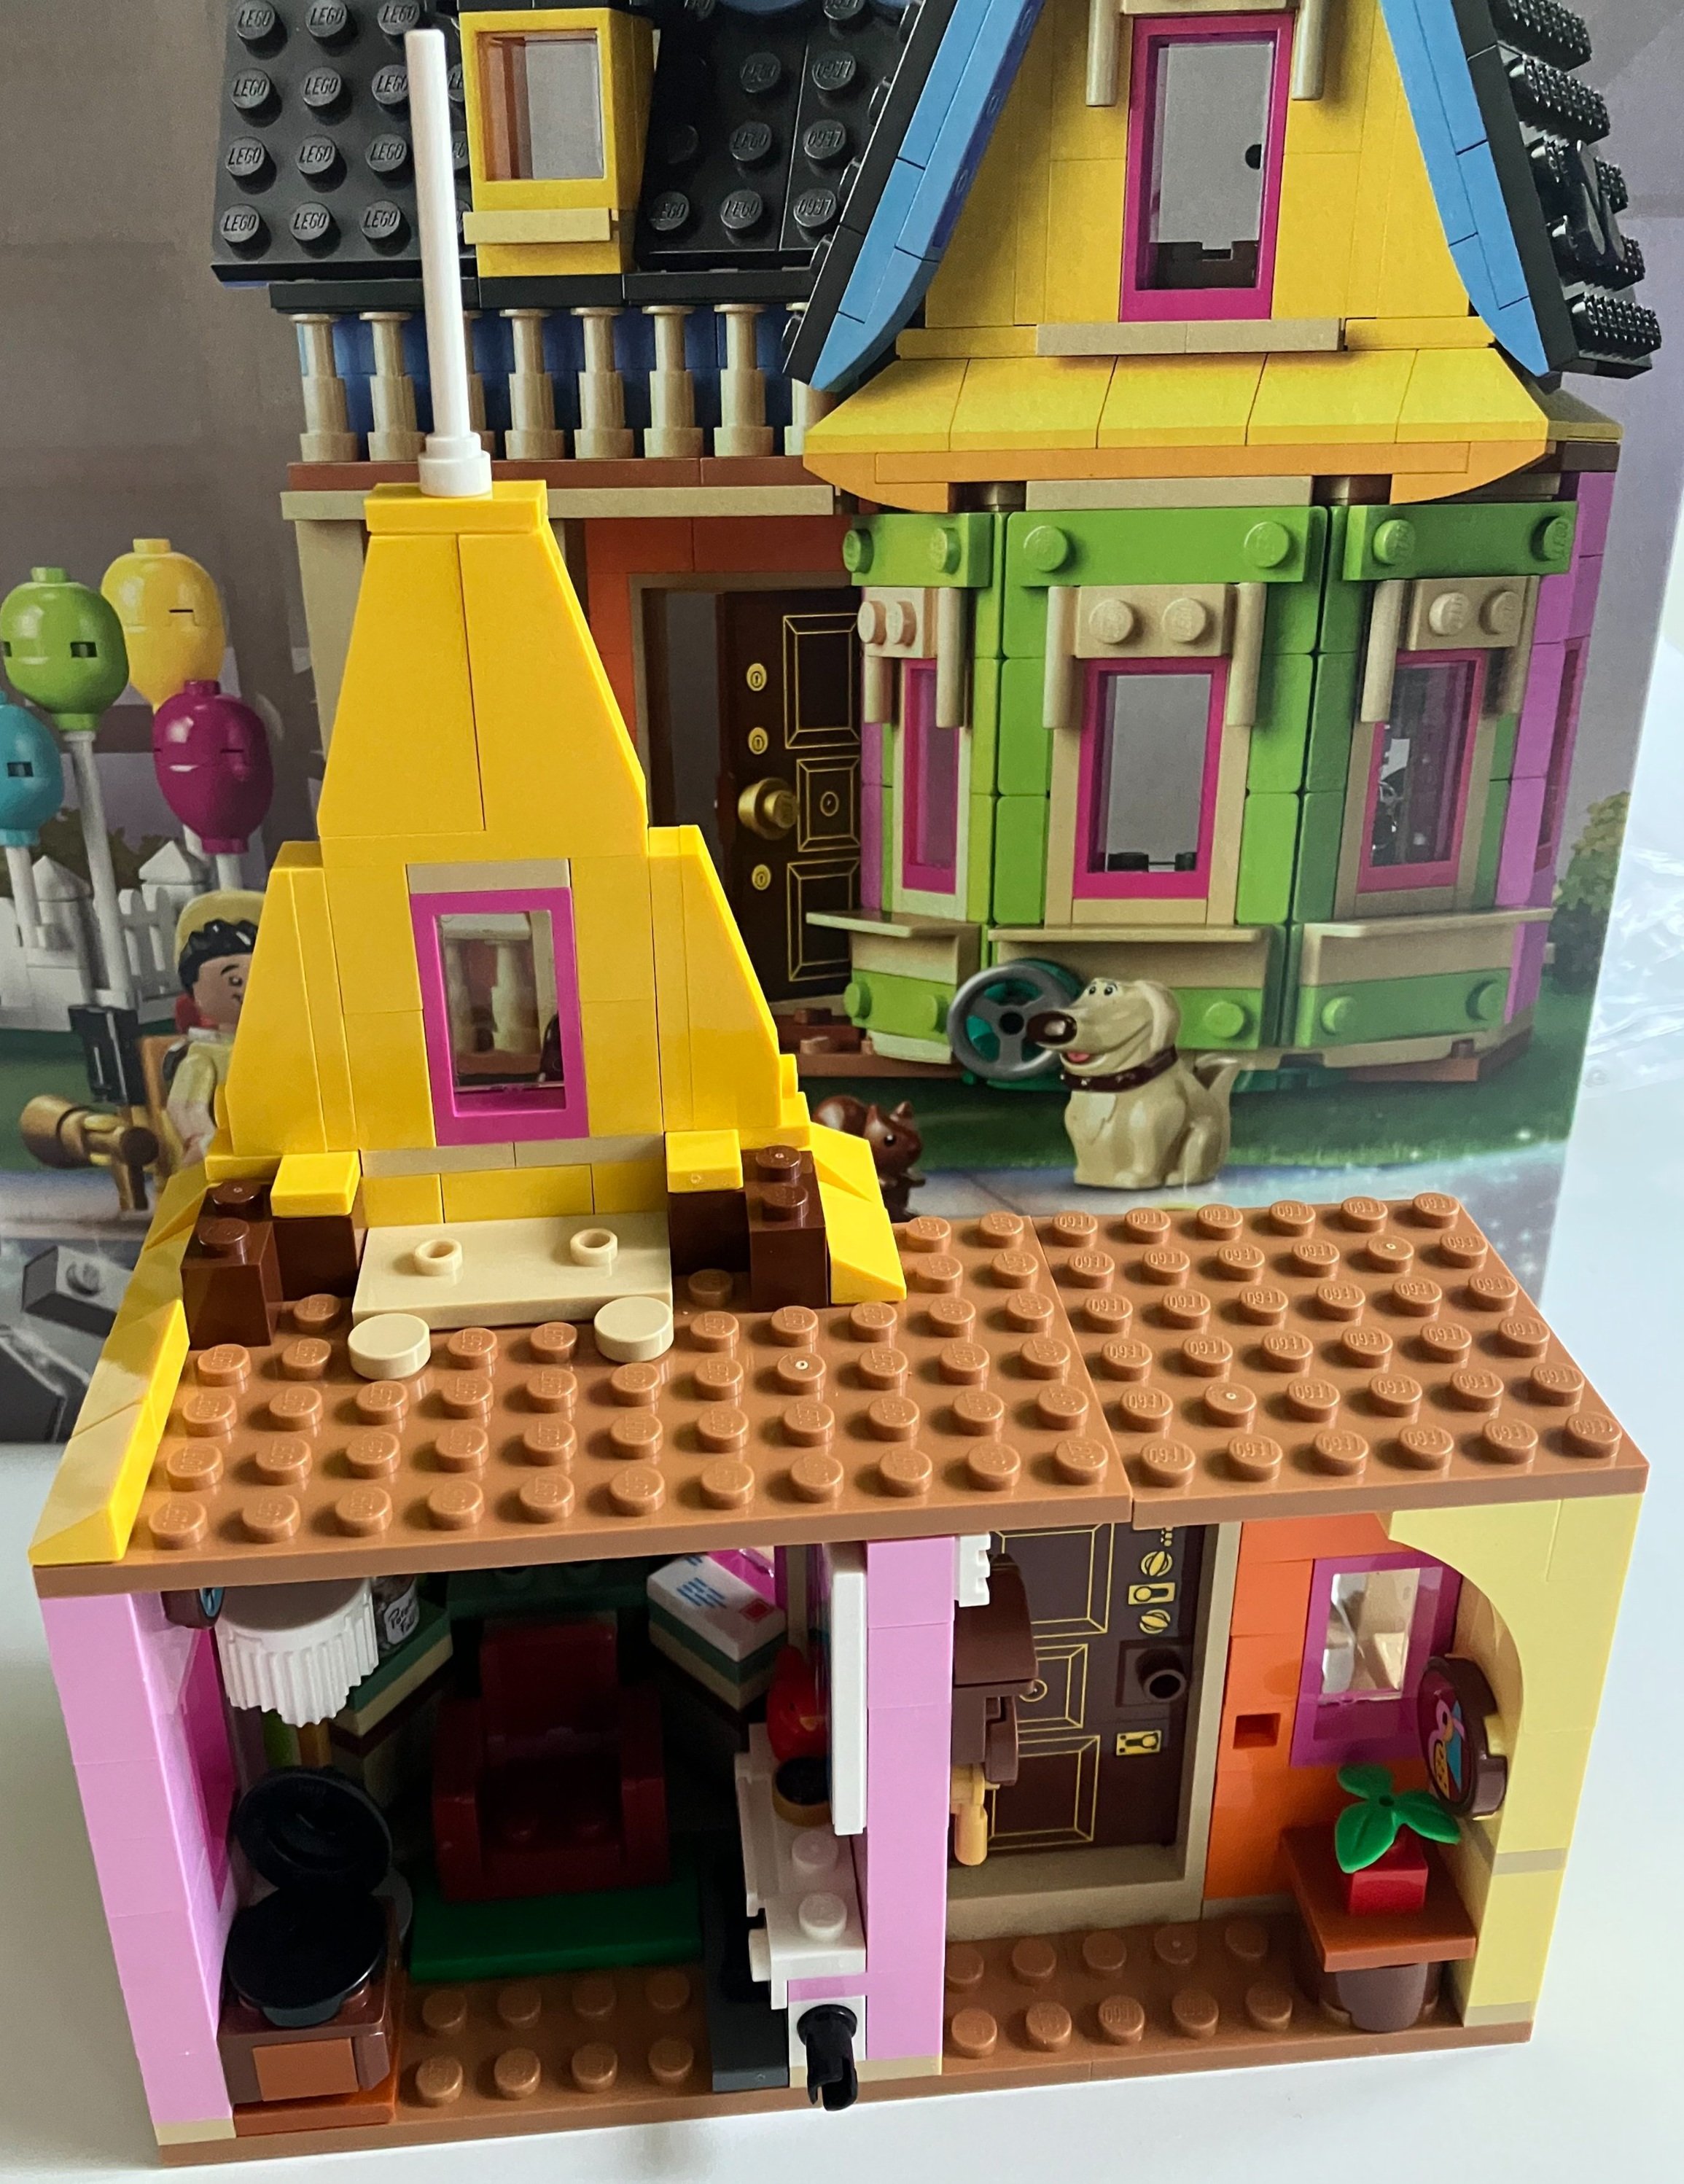 LEGO Disney 43217 'Up' House - Adventure awaits! [Review] - The